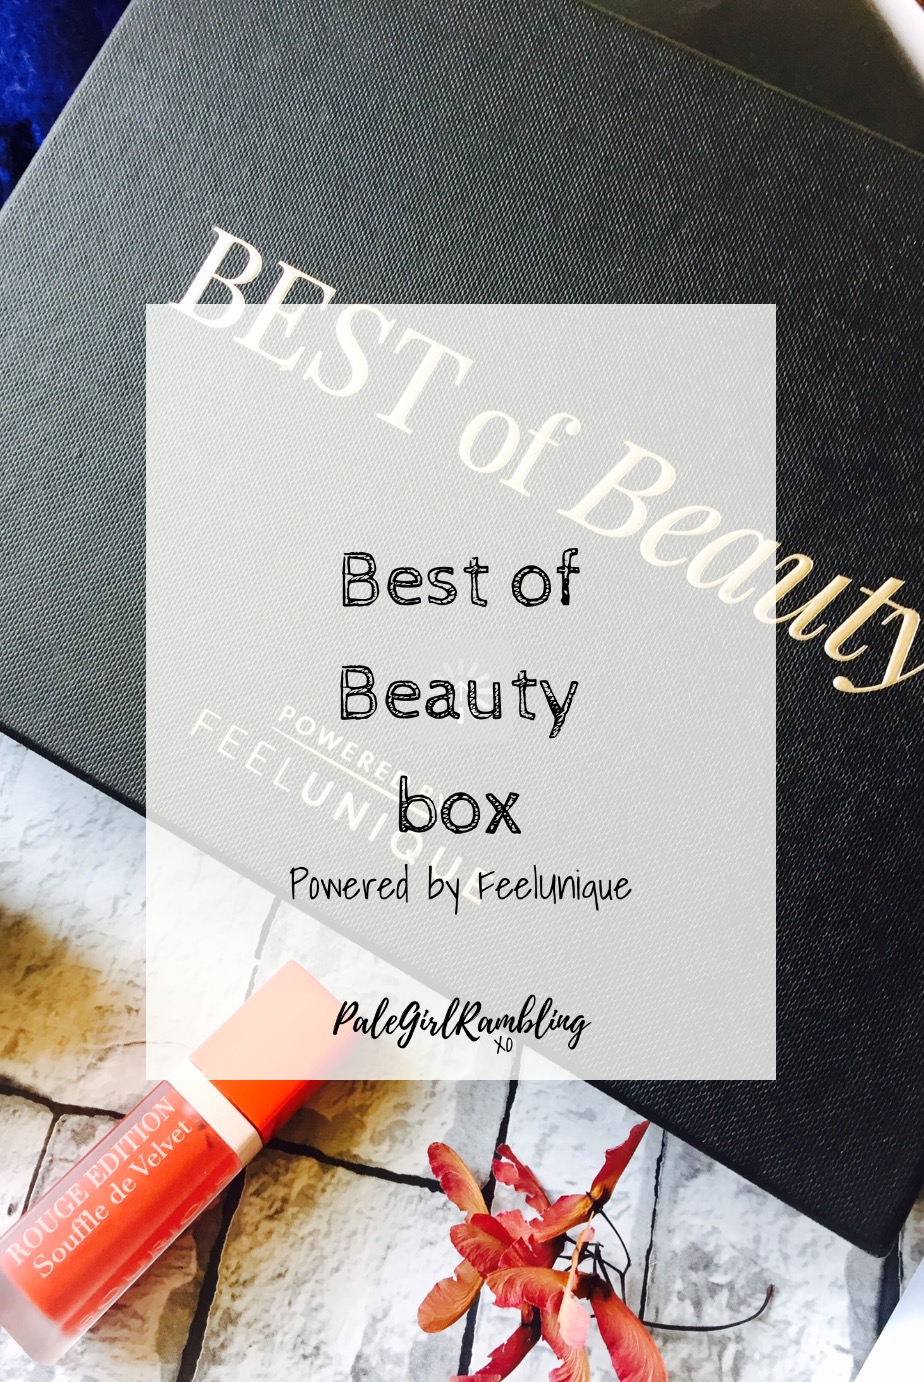 Feel Unique Best of Beauty box powered by Nude by Nature boujoris Elizabeth Arden Laura geller primer PHB Ethical beauty